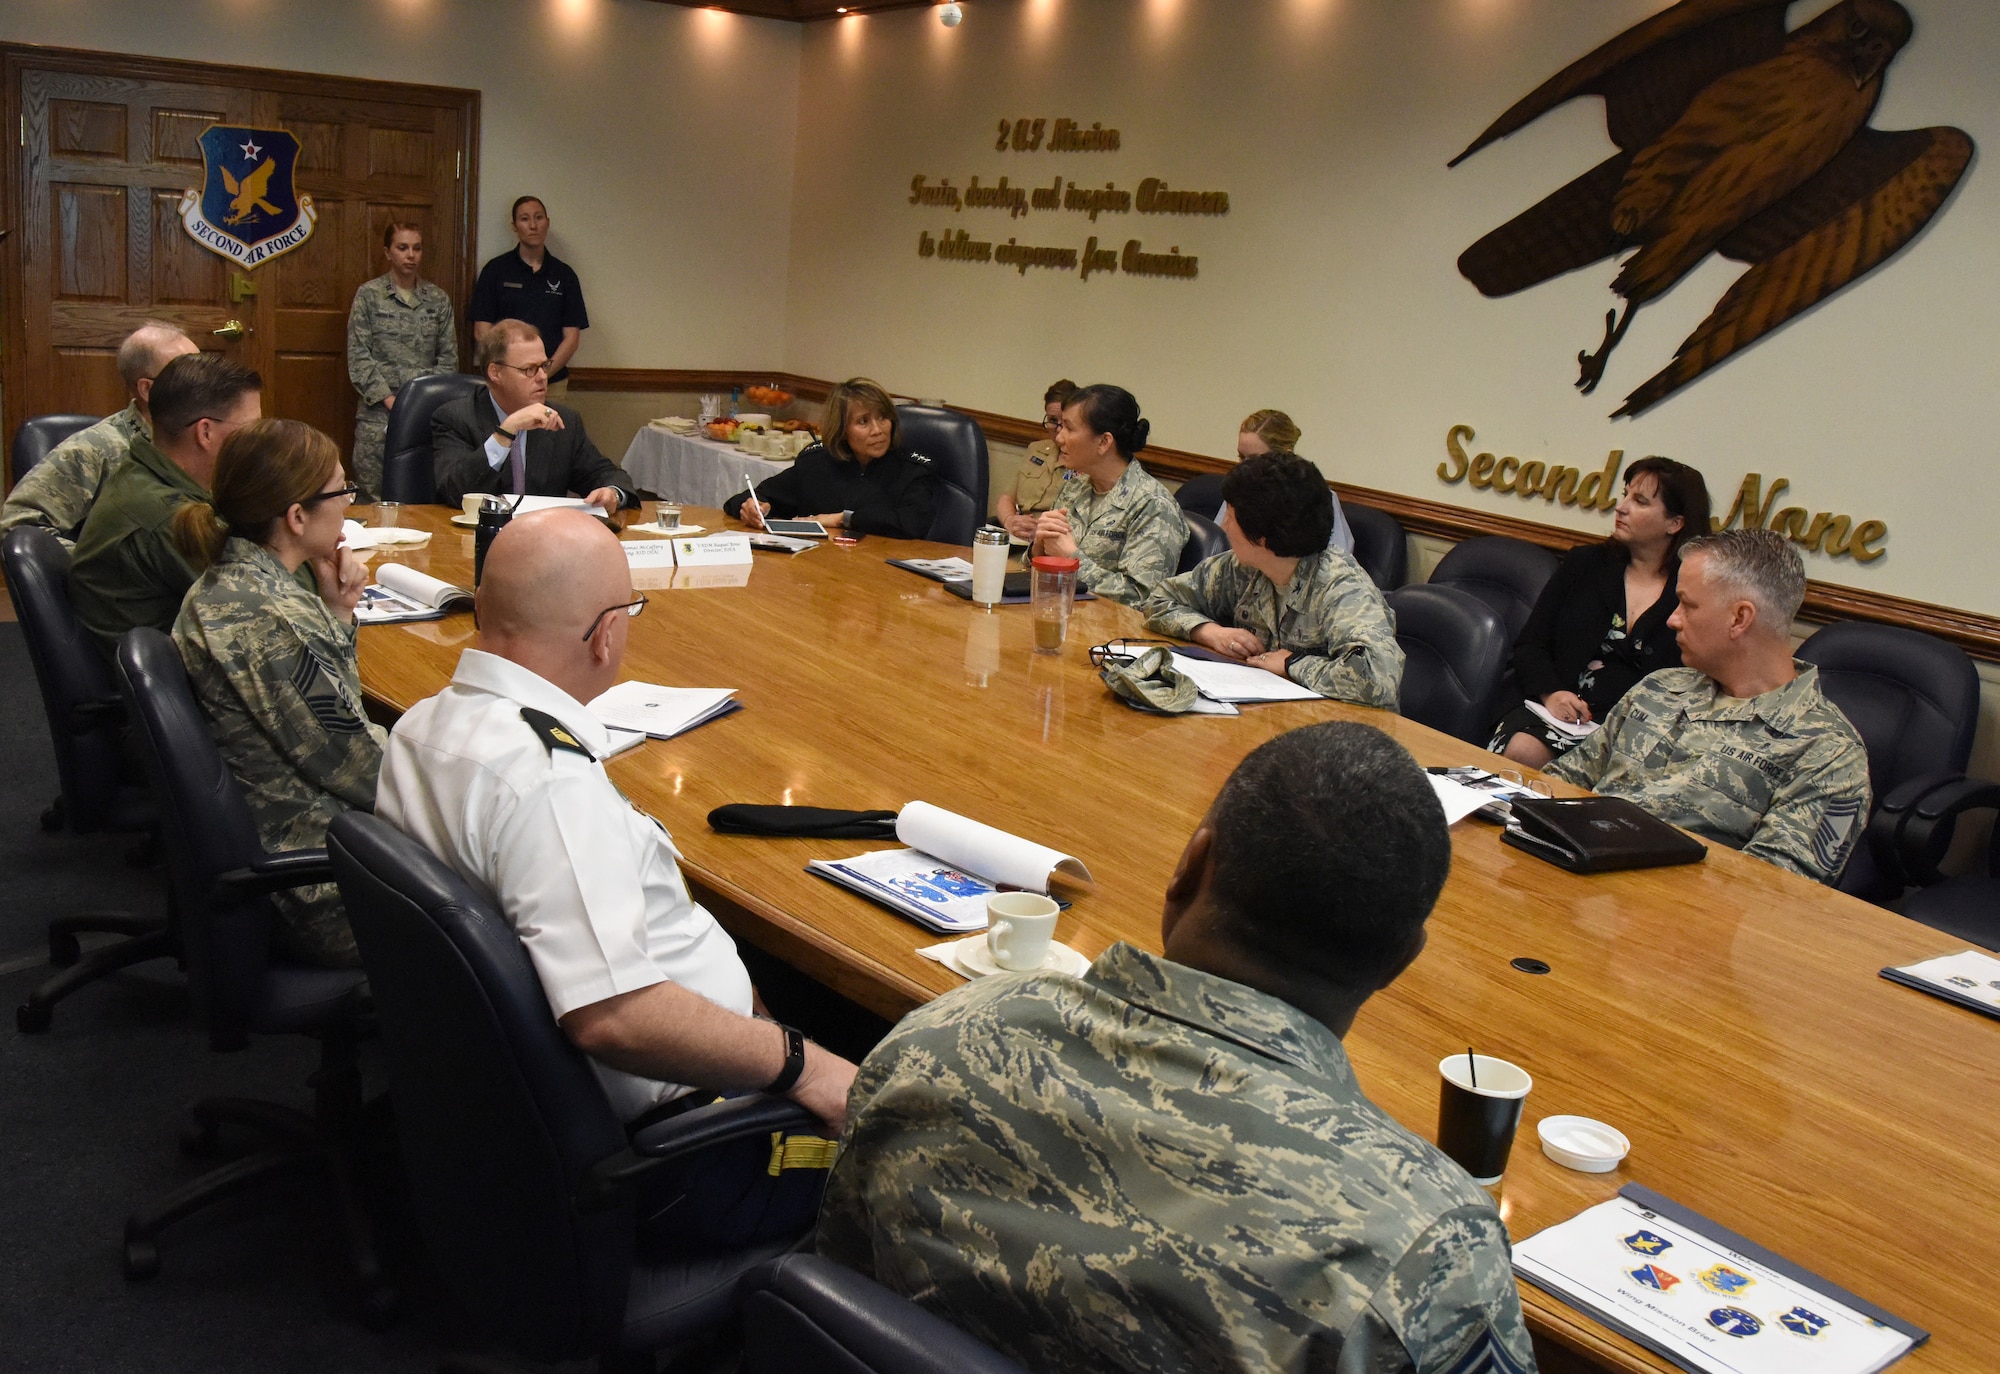 U.S. Air Force Col. Debra Lovette, 81st Training Wing commander, hosts an 81st TRW mission brief for Defense Health Agency leadership at the 2nd Air Force headquarters building during a site visit at Keesler Air Force Base, Mississippi, April 27, 2018. The purpose of the visit was to get oriented with base operations and the Keesler Medical Center. The visit also included an office call with 2nd Air Force leadership and tours of the Clinical Research Lab and the newly renovated 81st Dental Squadron clinic. (U.S. Air Force photo by Kemberly Groue)